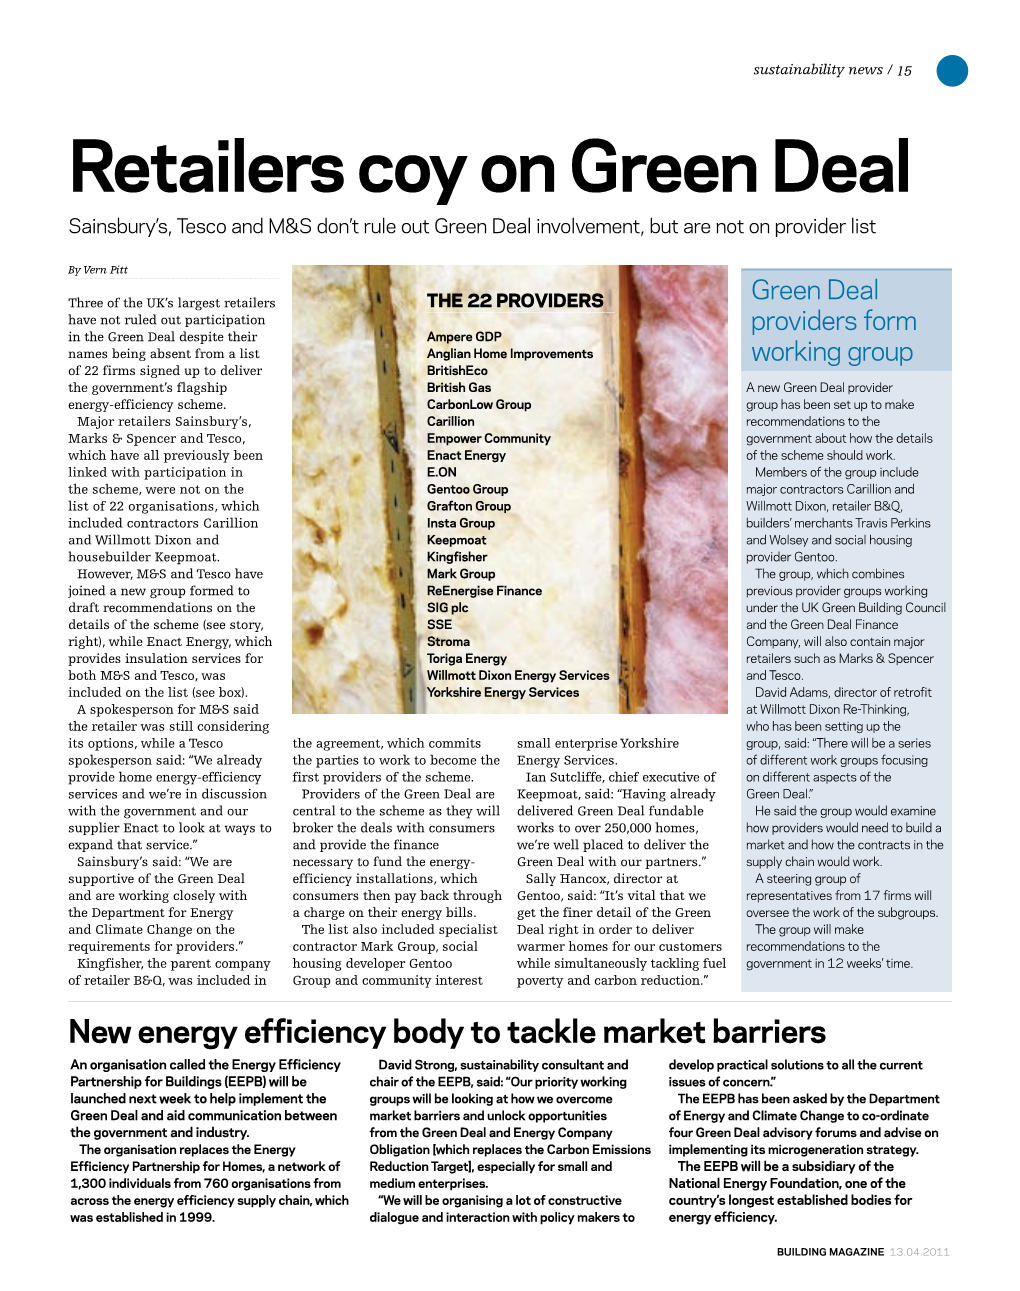 Retailers Coy on Green Deal